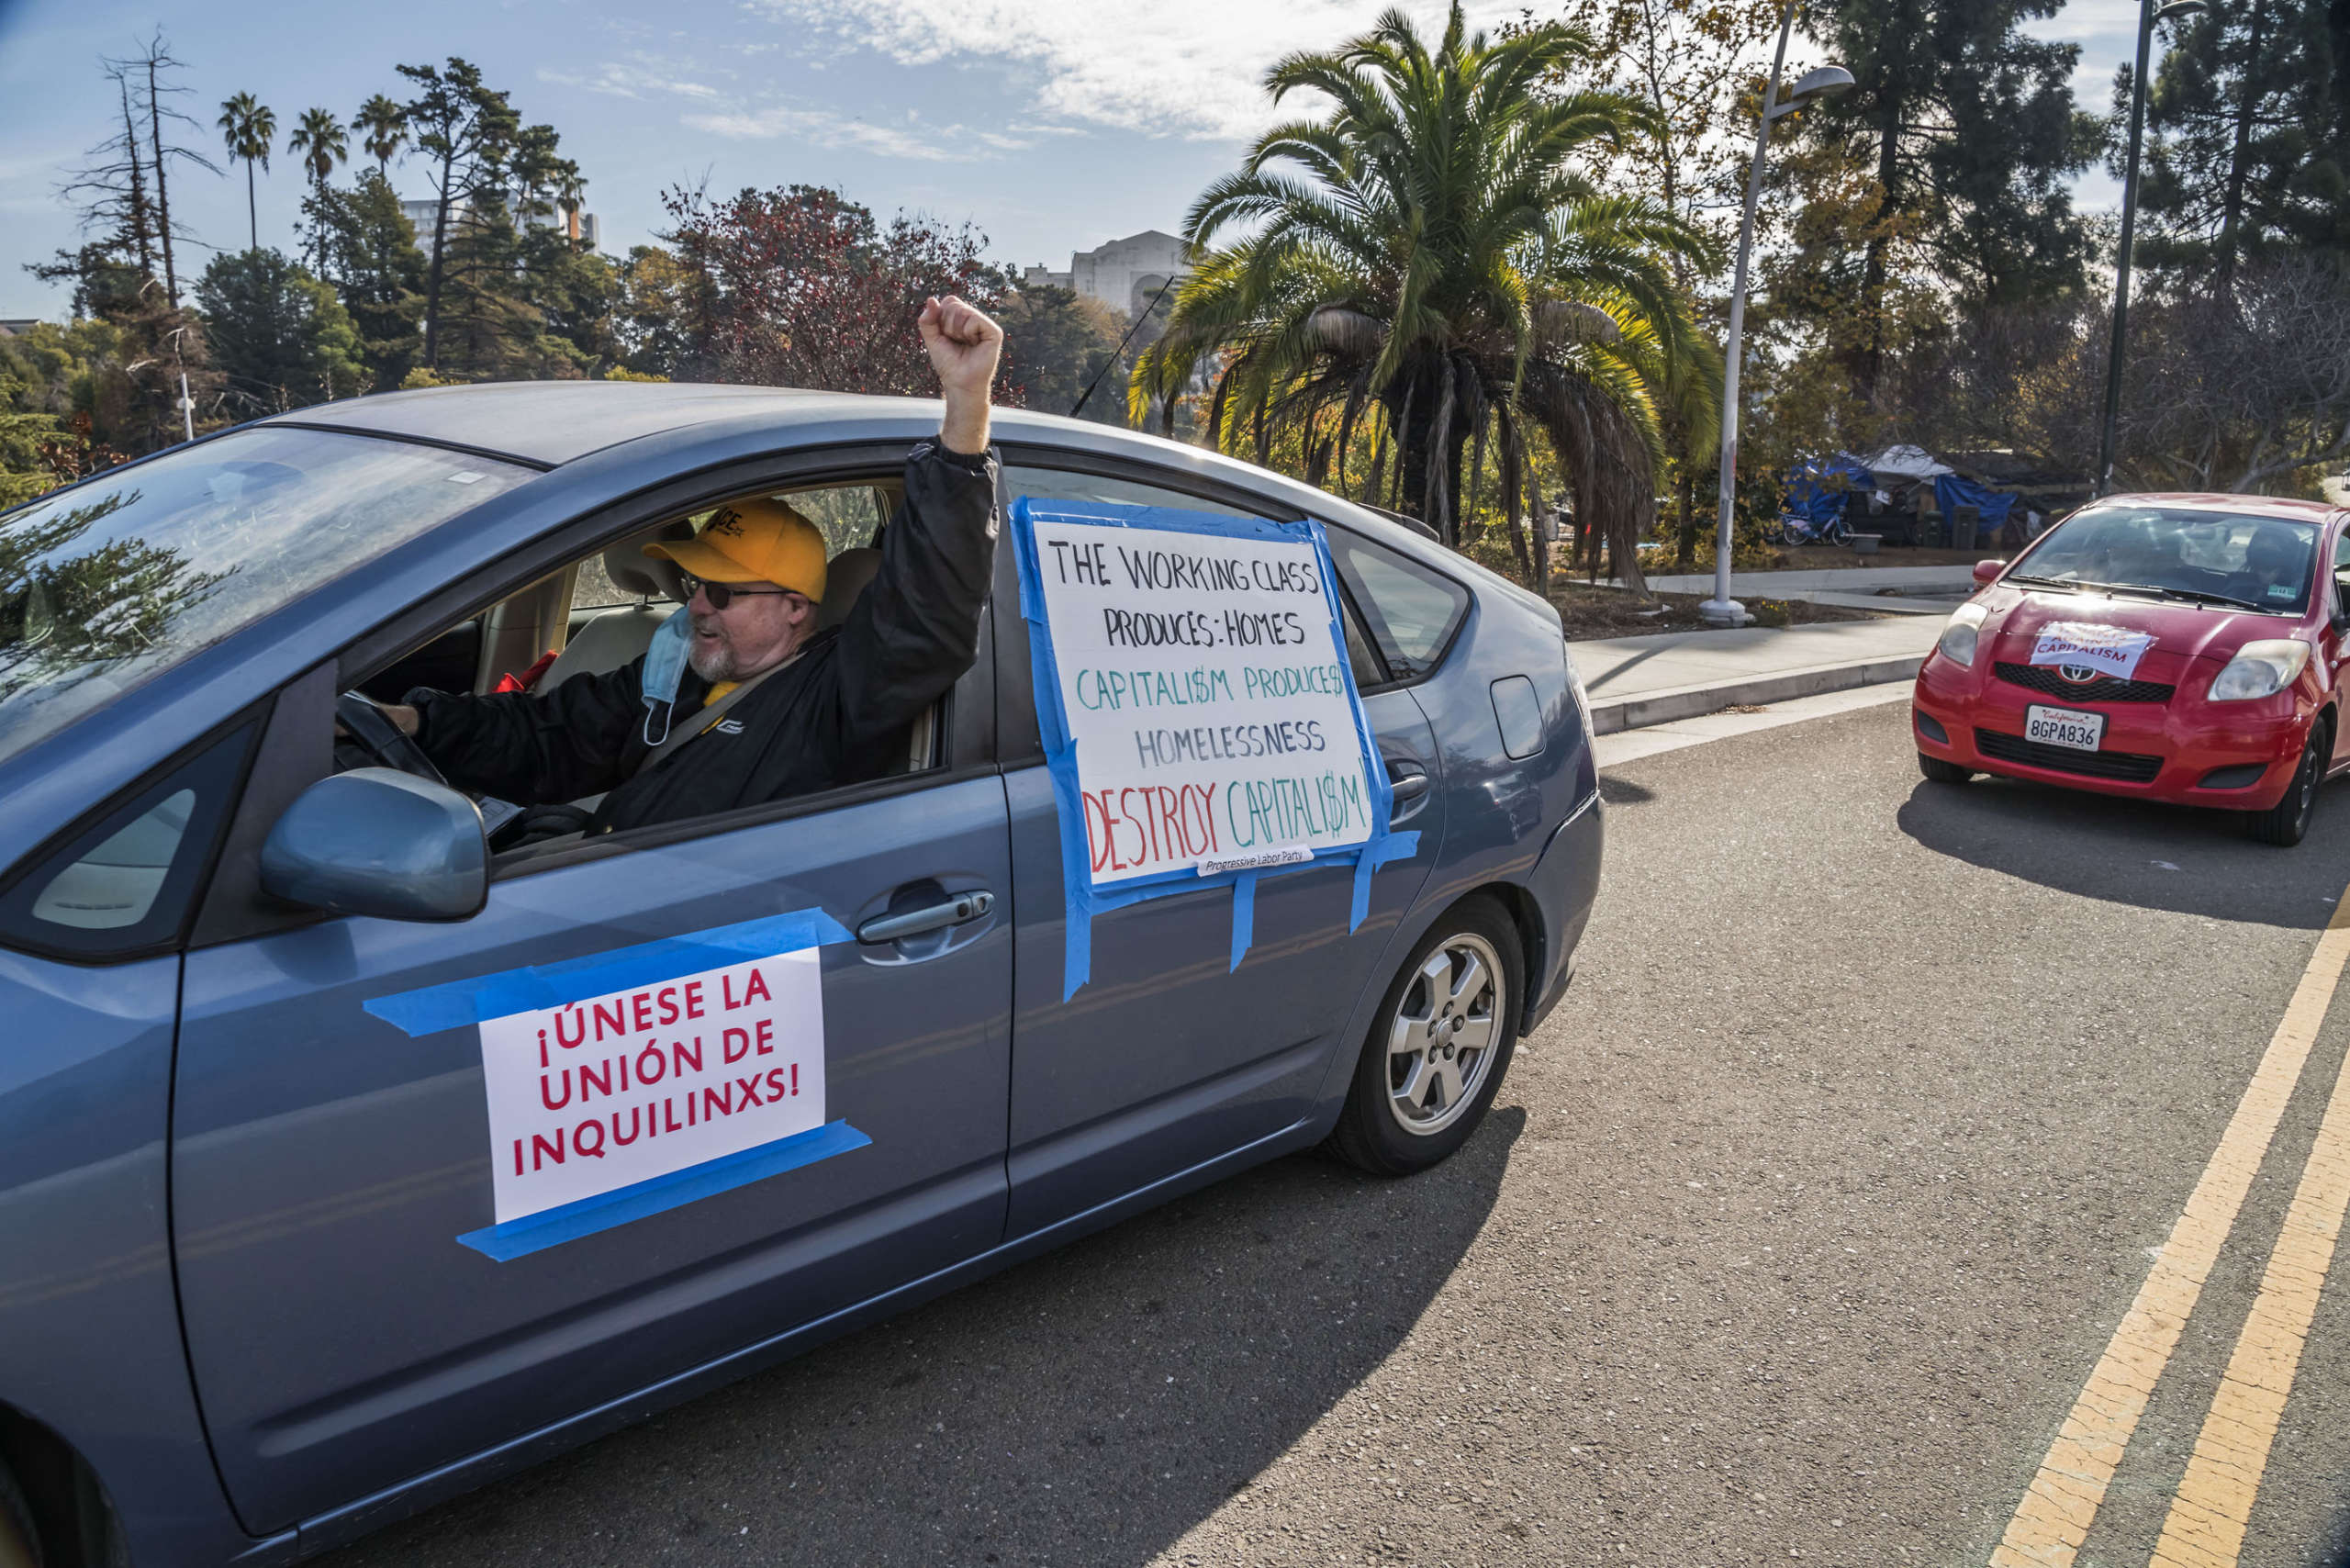 A driver holds up his fist in a car with his demands taped to the windows.